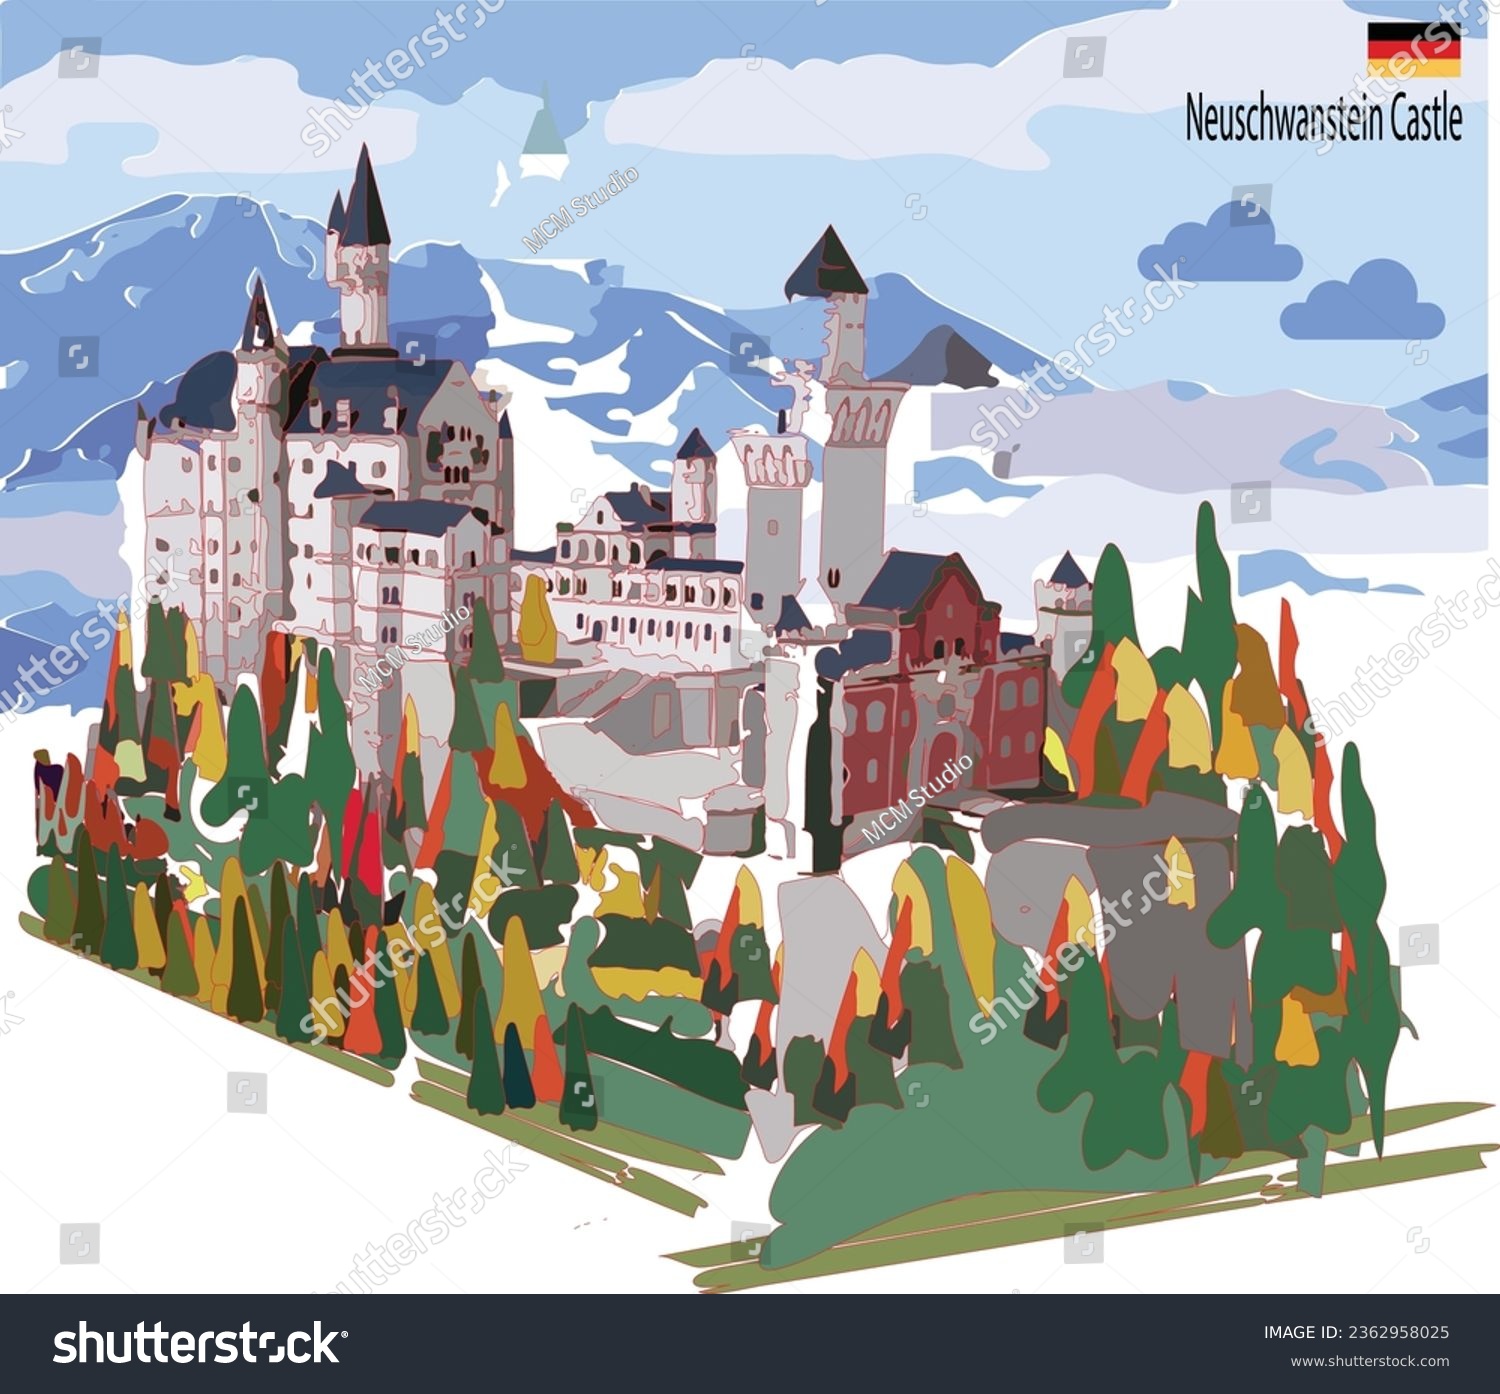 SVG of Neuschwanstein castle in germany with view of buildings, trees and mountains in vector svg